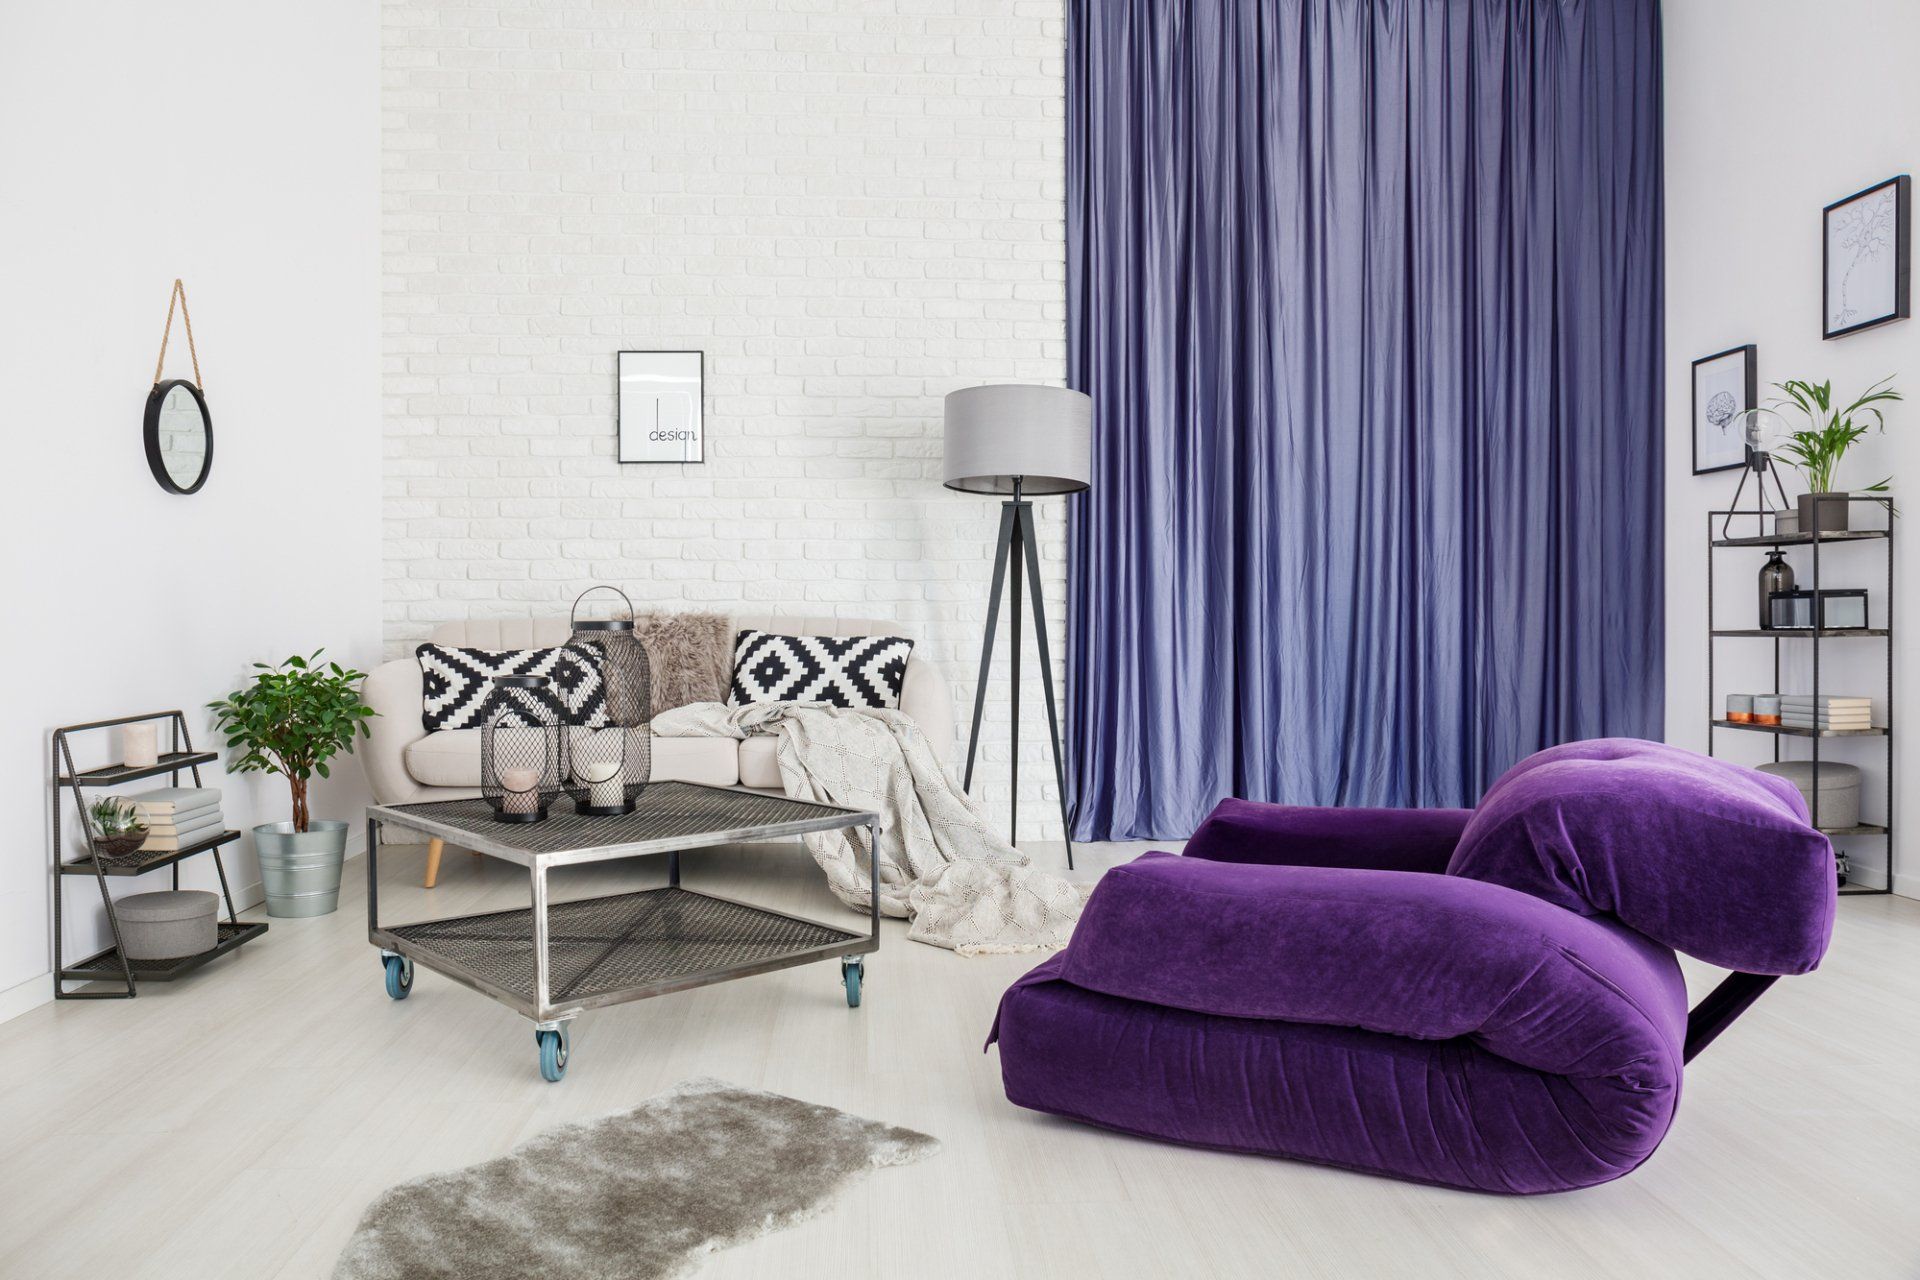 White plaster and brick walls in industrial setting lounge. Industrial trolley coffee table, shelves and lamp. Brigh purple plush lounge chair in front of closed purple curtains.